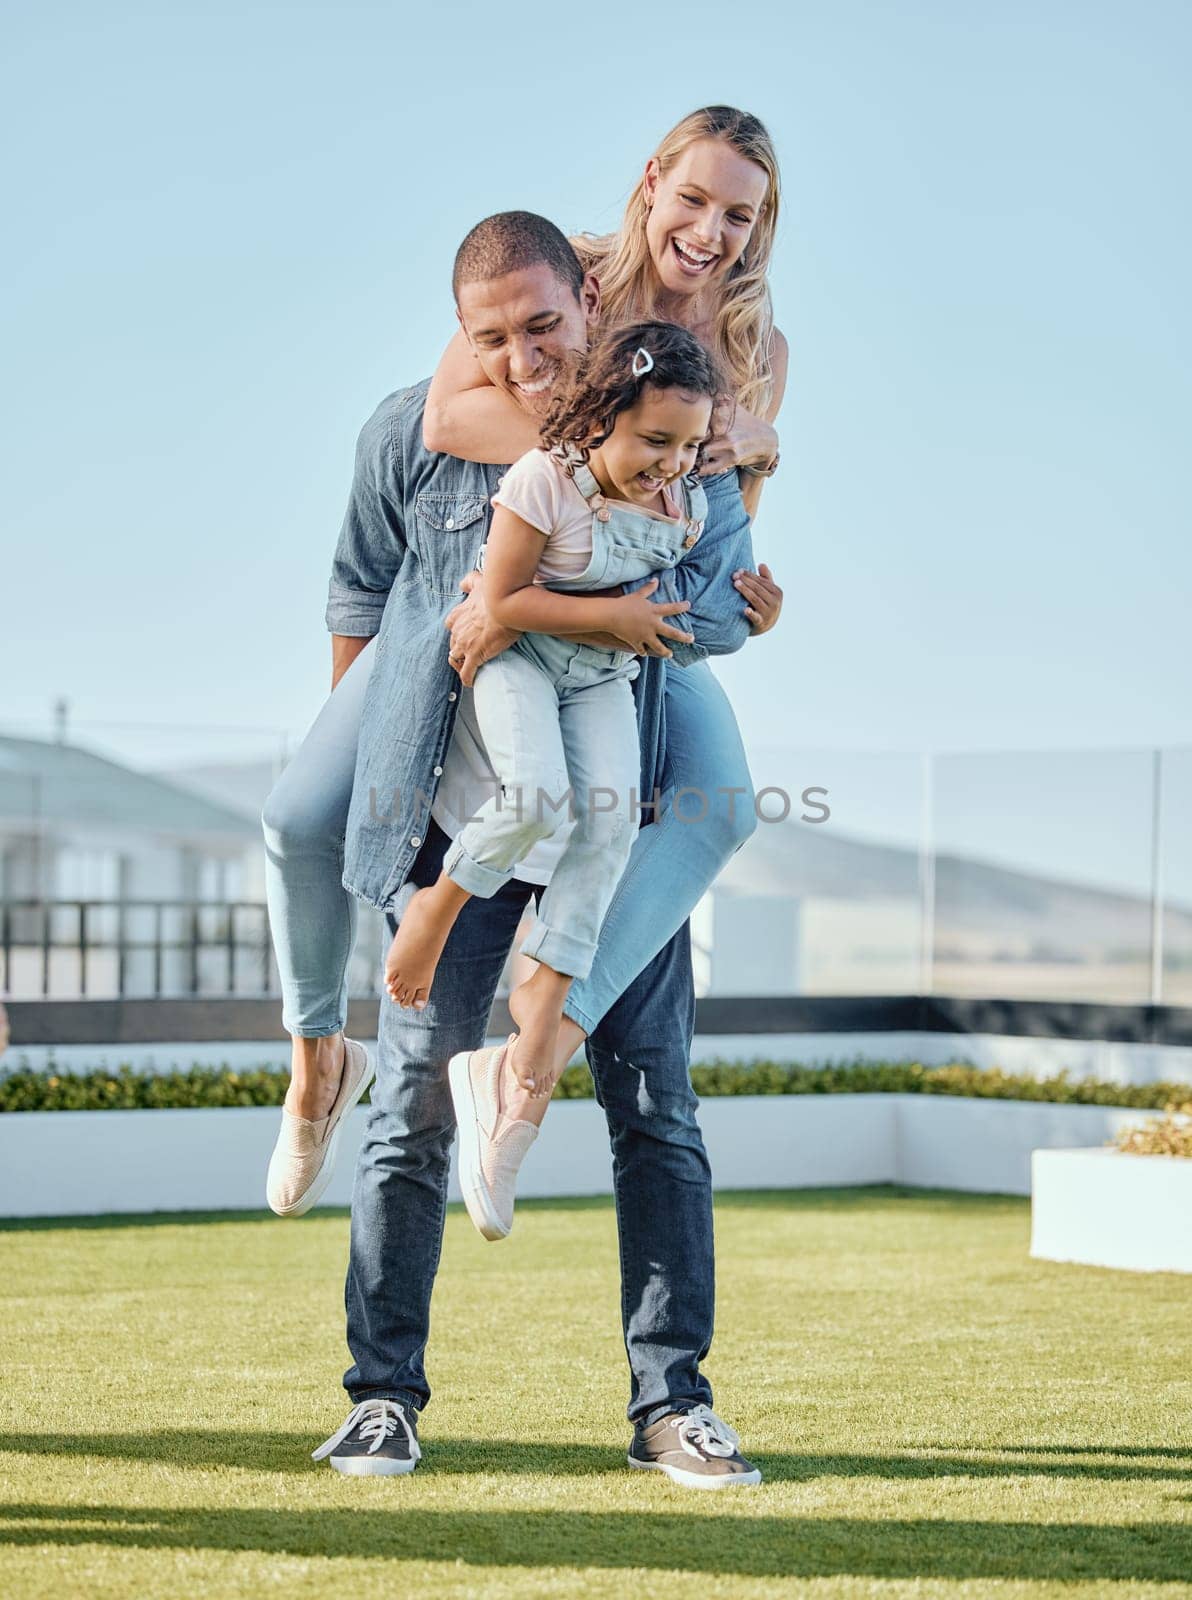 Happy family, fun and parents with a girl child on a house roof in summer with a smile. Happiness, quality time and interracial family of a mother, dad and kid feeling love and care outdoor together.